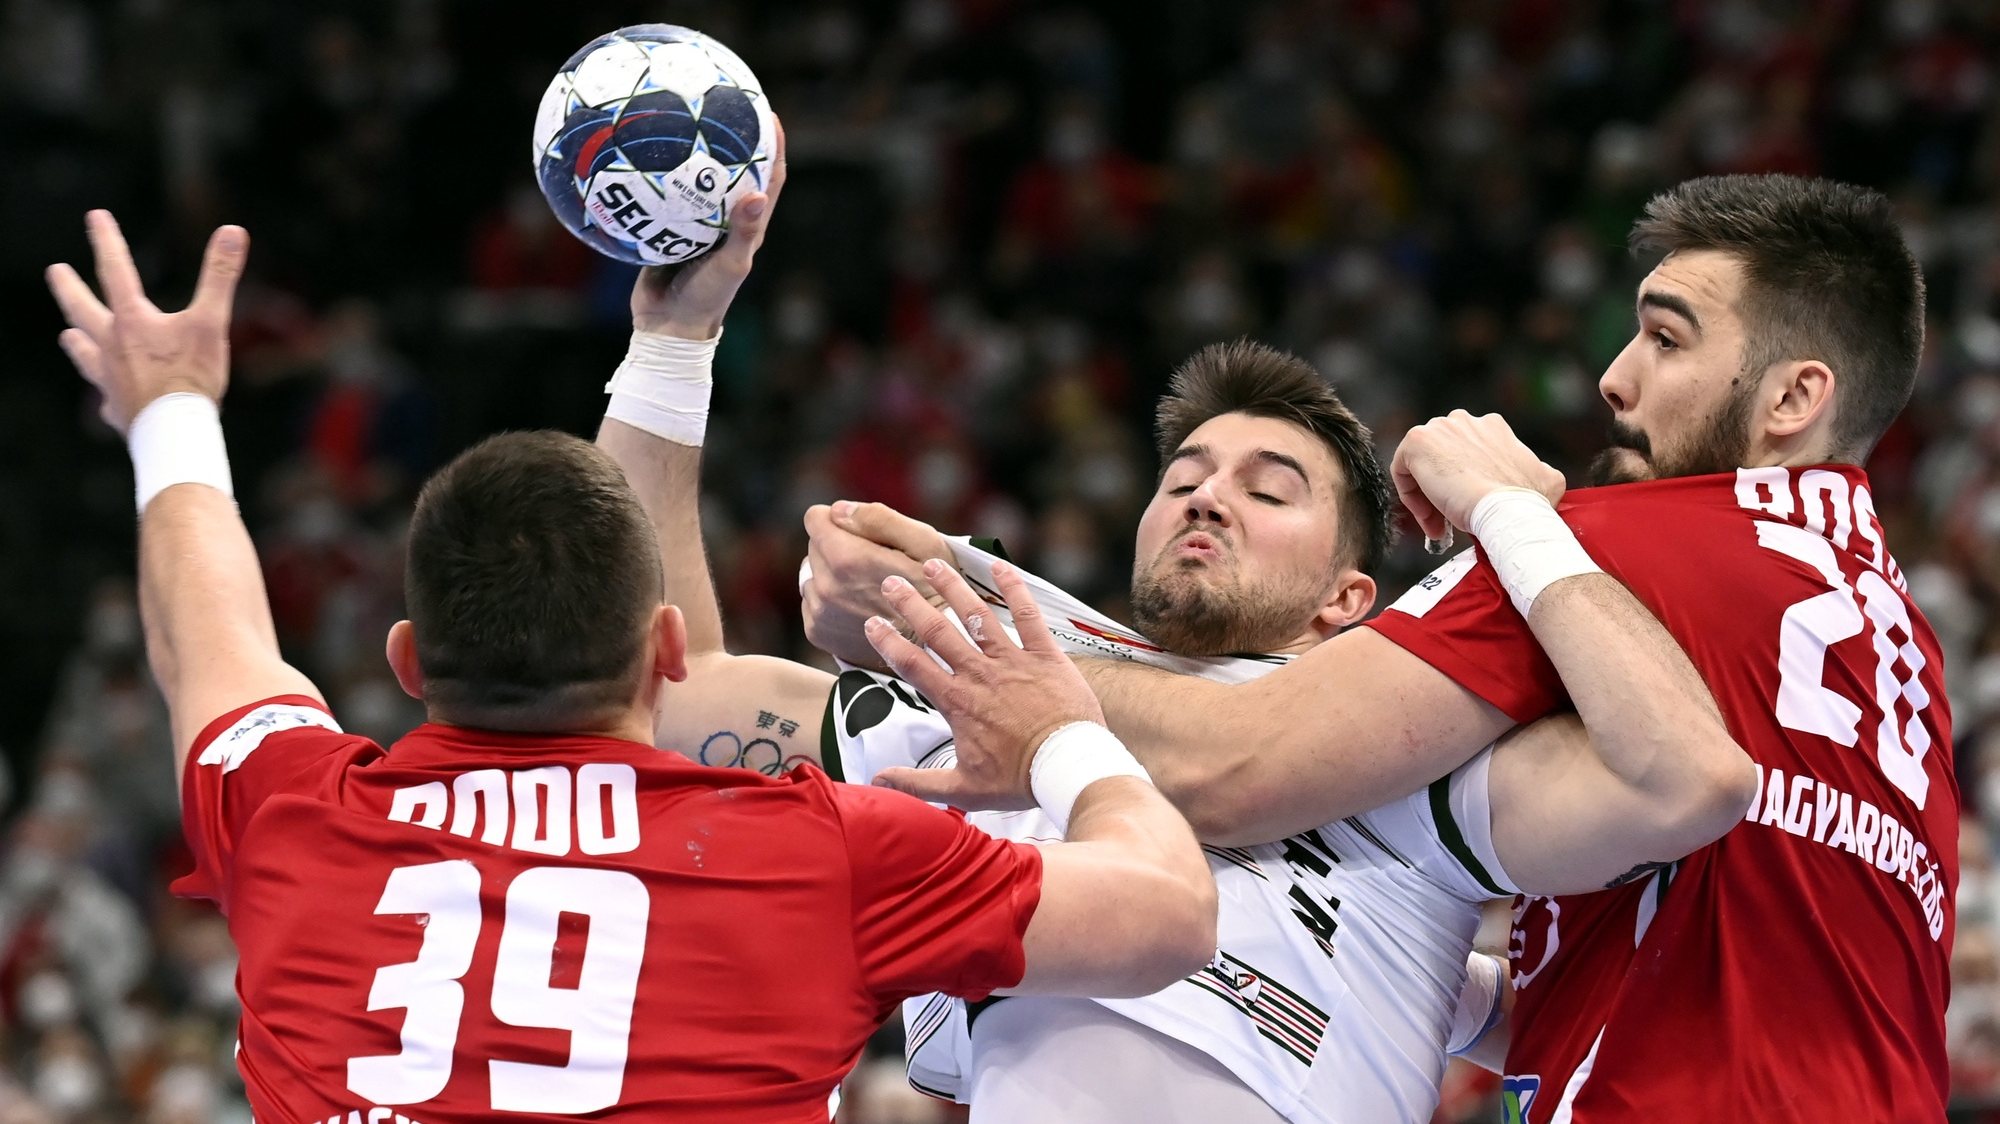 epa09689778 Miguel Martins Soares (C) of Portugal is challenged by Richard Bodo (L) and Miklos Rosta (R) of Hungary during the Mens Handball European Championship peliminary round Group B match Portugal vs. Hungary in MVM Dome in Budapest, Hungary, 16 January 2022.  EPA/Tamas Kovacs HUNGARY OUT